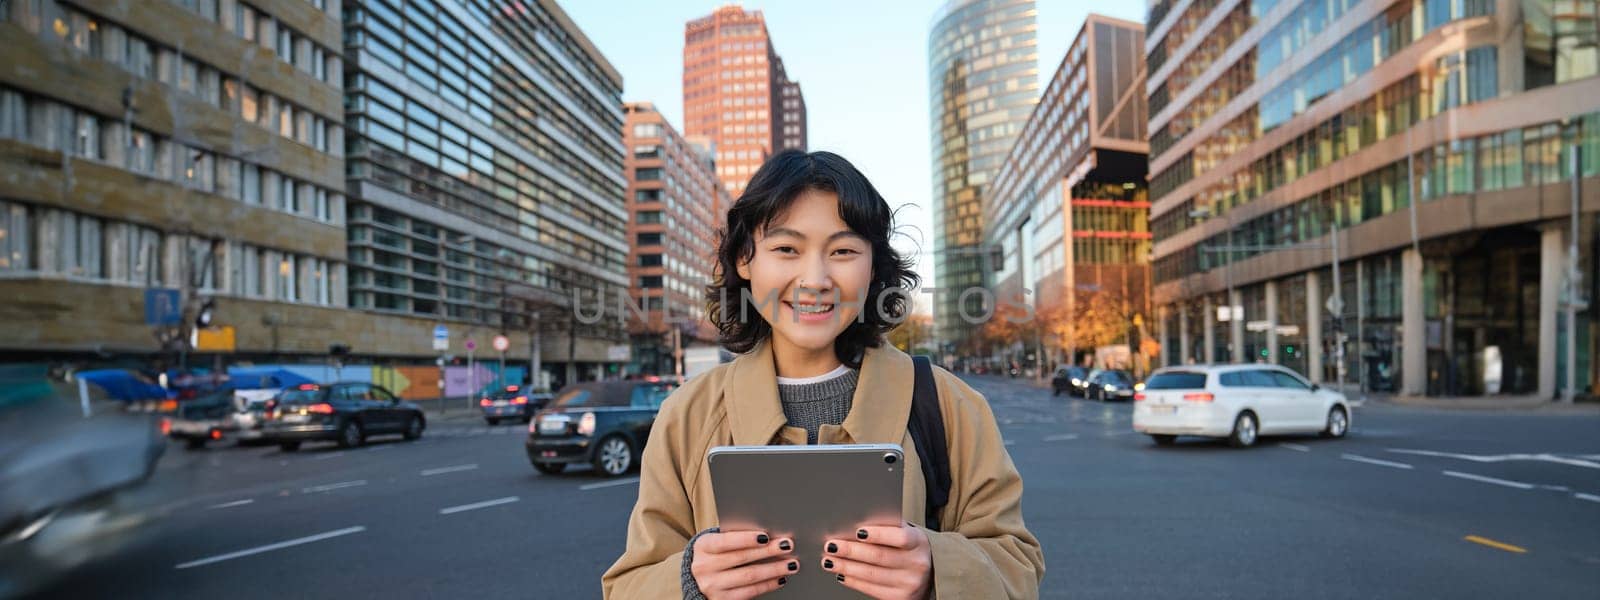 Portrait of asian girl student, stands in city centre with cars on busy street, holds digital tablet and smiles at camera by Benzoix